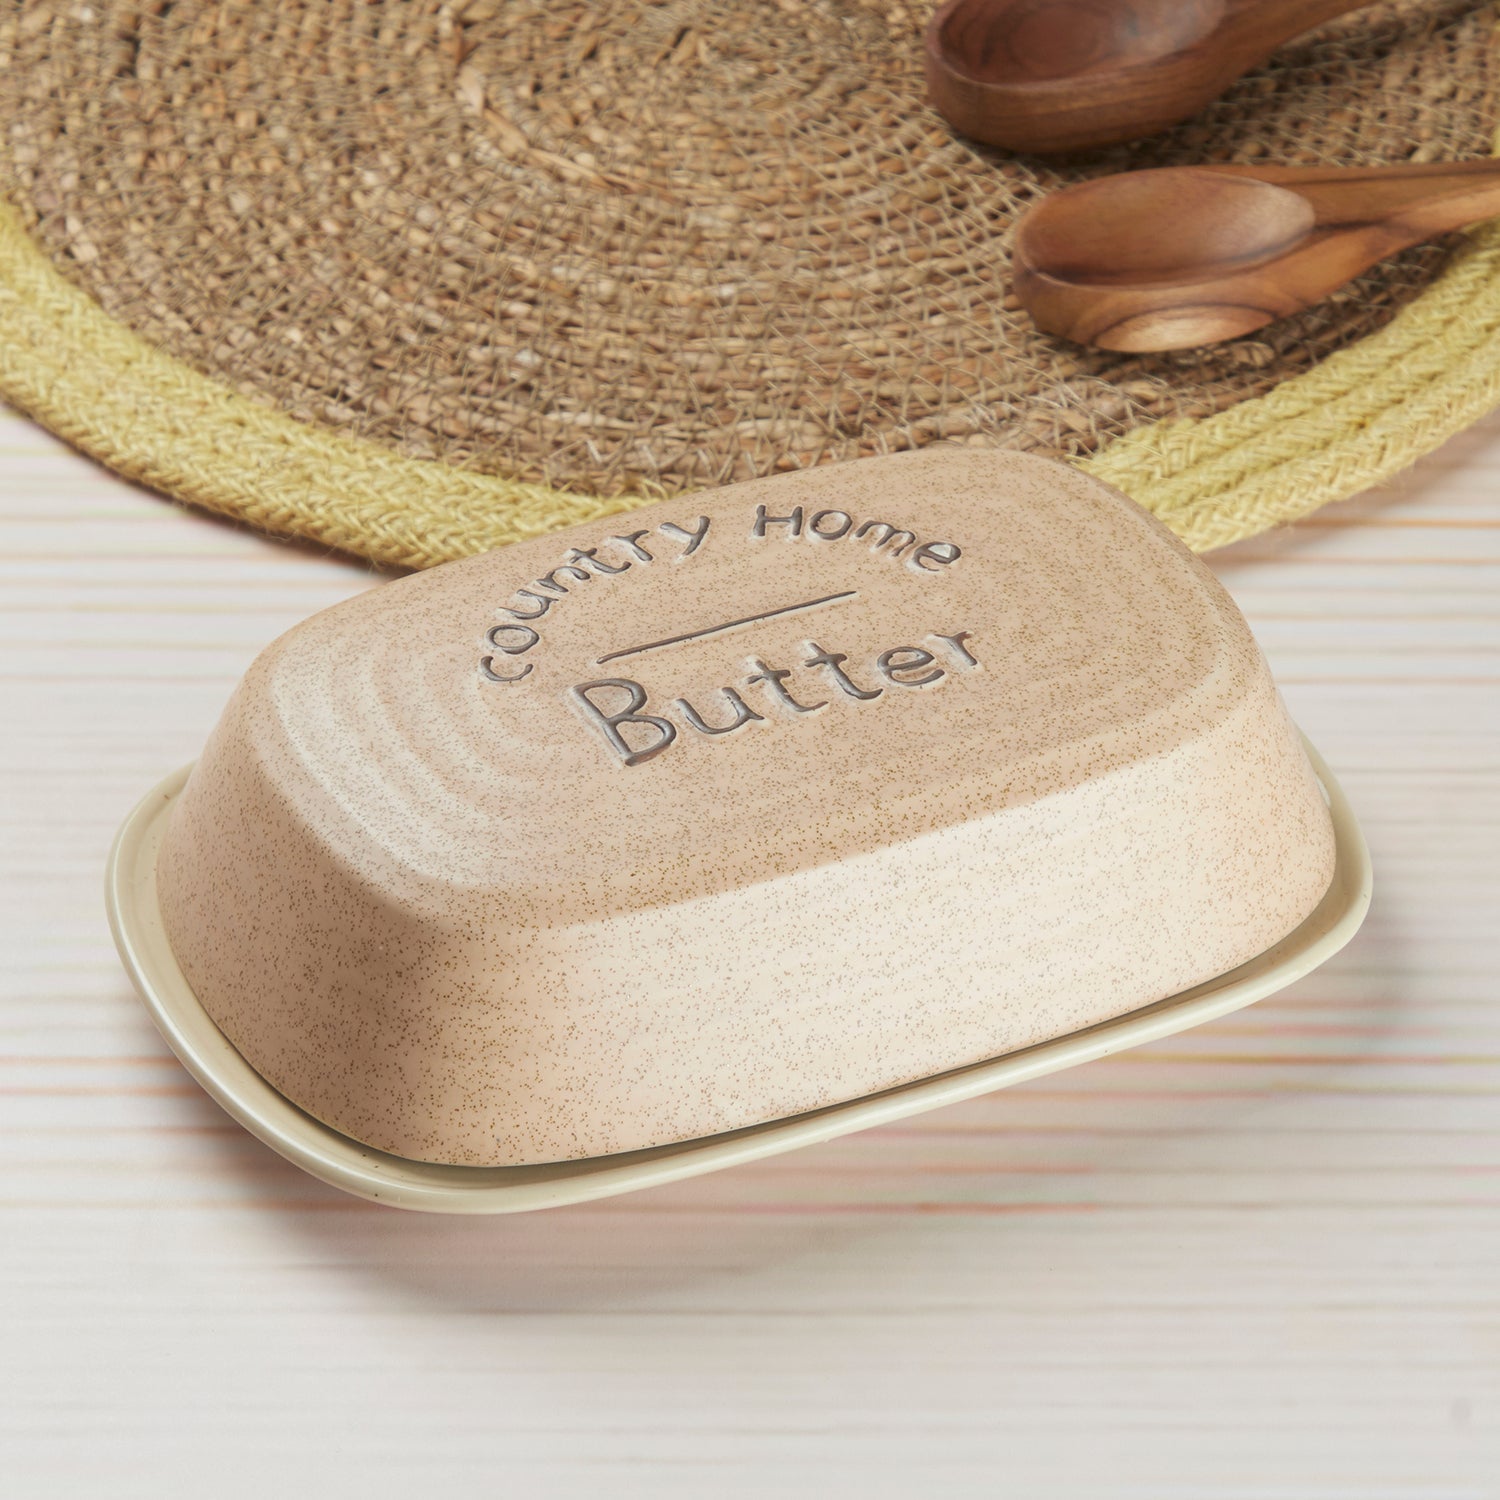 Ceramic Butter Dish Tray with Lid with 250g (10268)